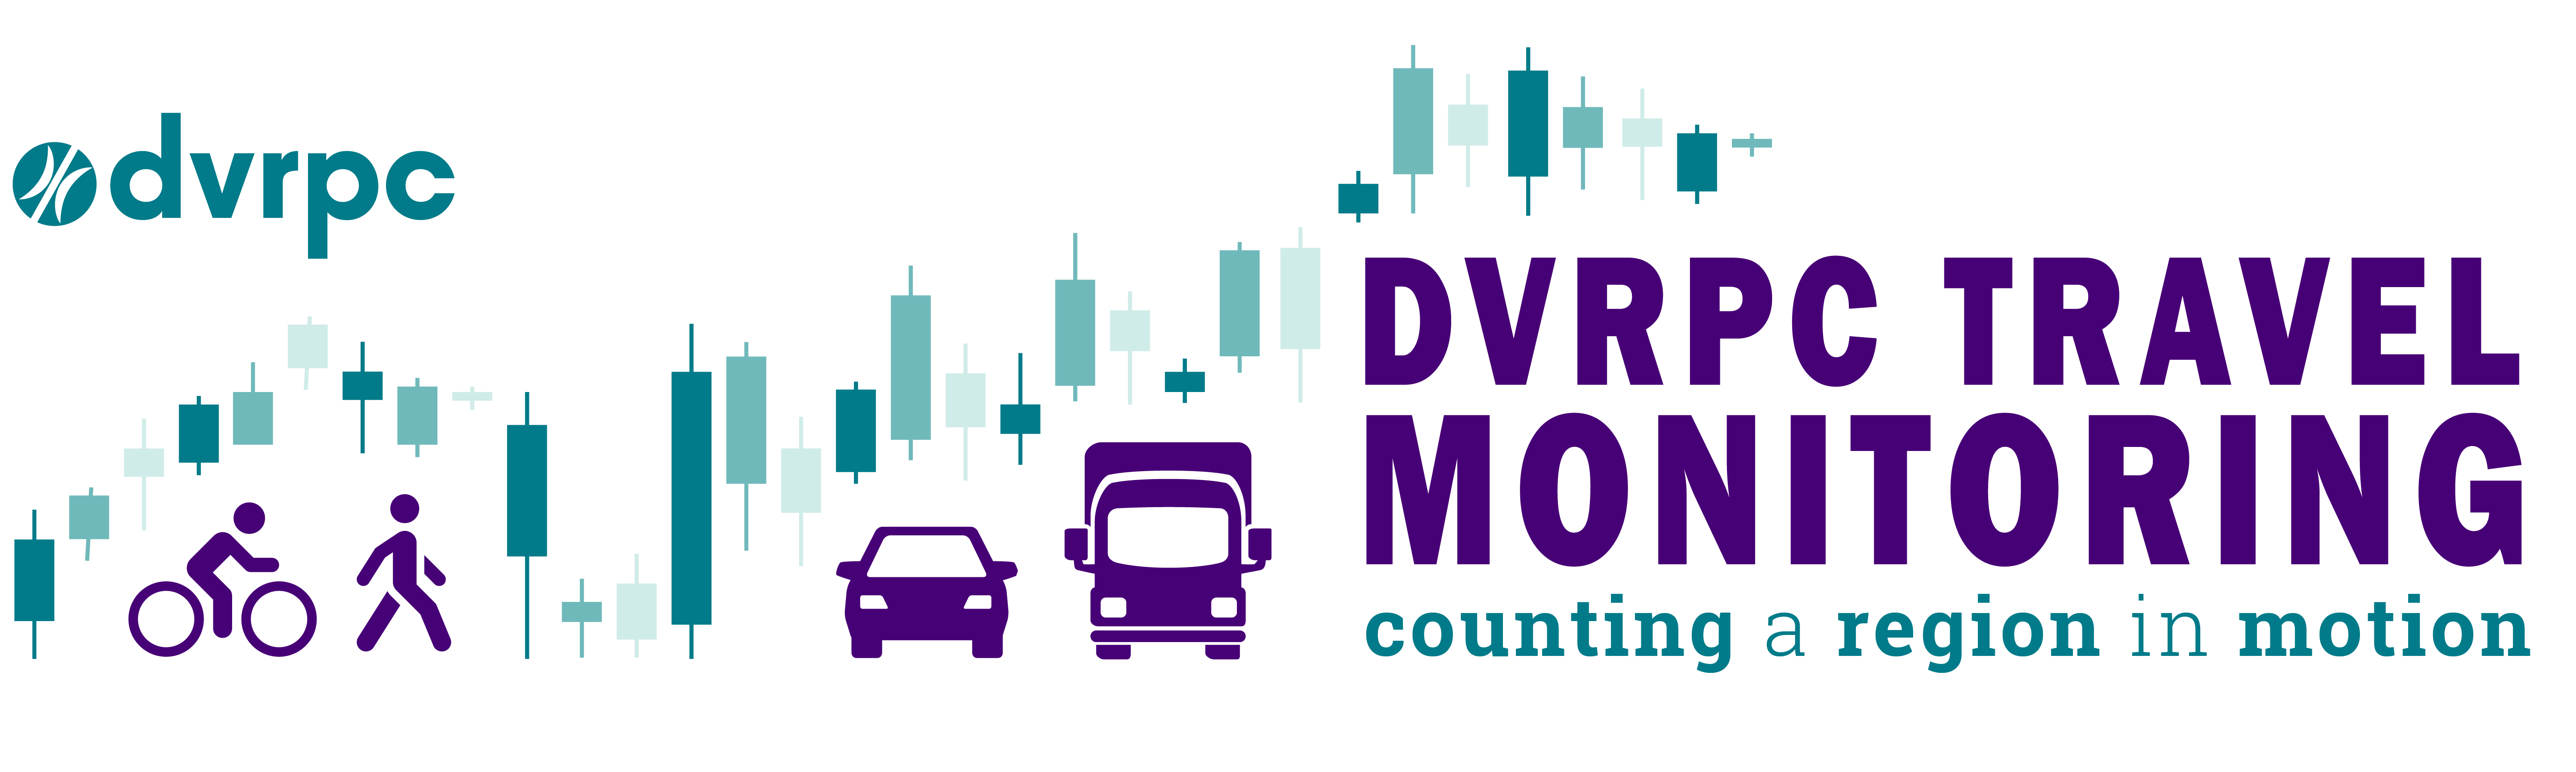 DVRPC Travel Monitoring, Counting a Region in Motion